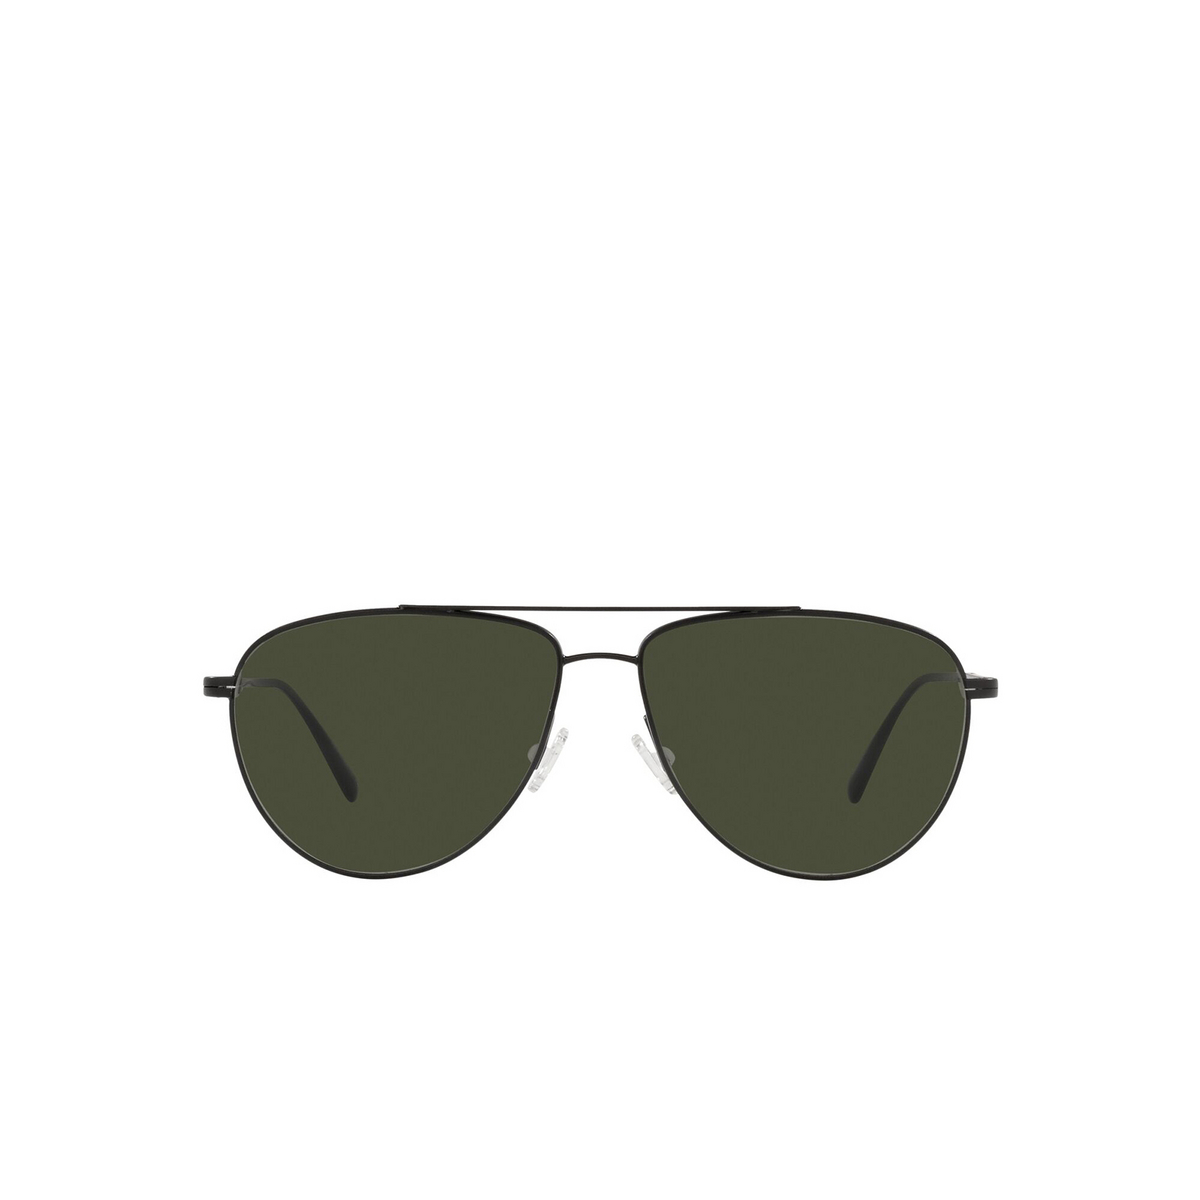 Oliver Peoples® Aviator Sunglasses: Disoriano OV1301S color Matte Black 506252 - front view.